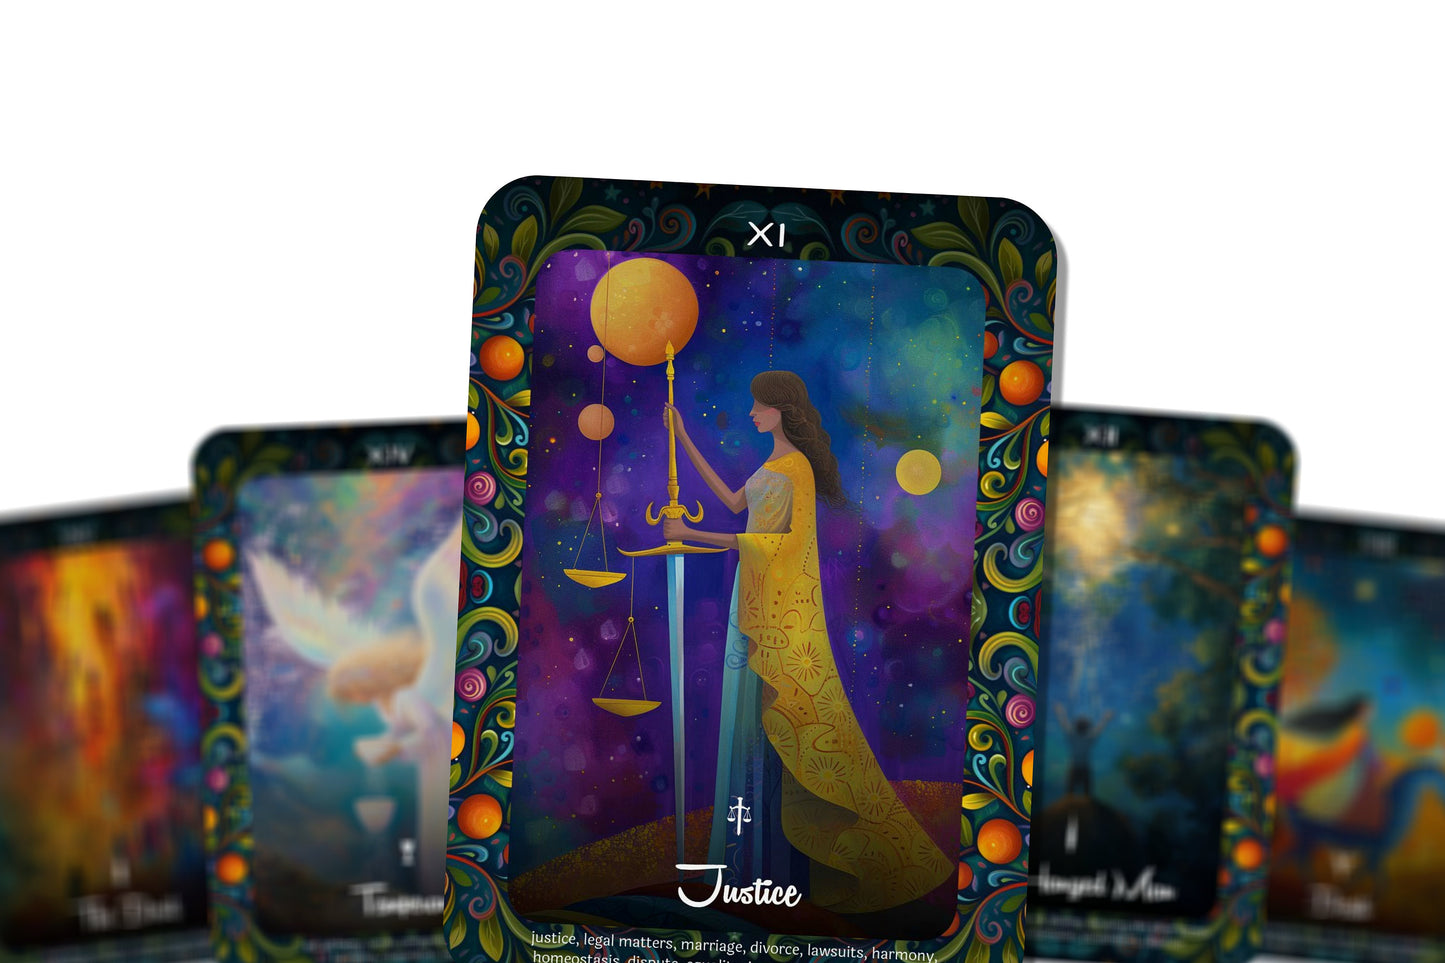 The Dreamscape Tarot - 78 cards - Otherworldly beauty and insightful symbolism